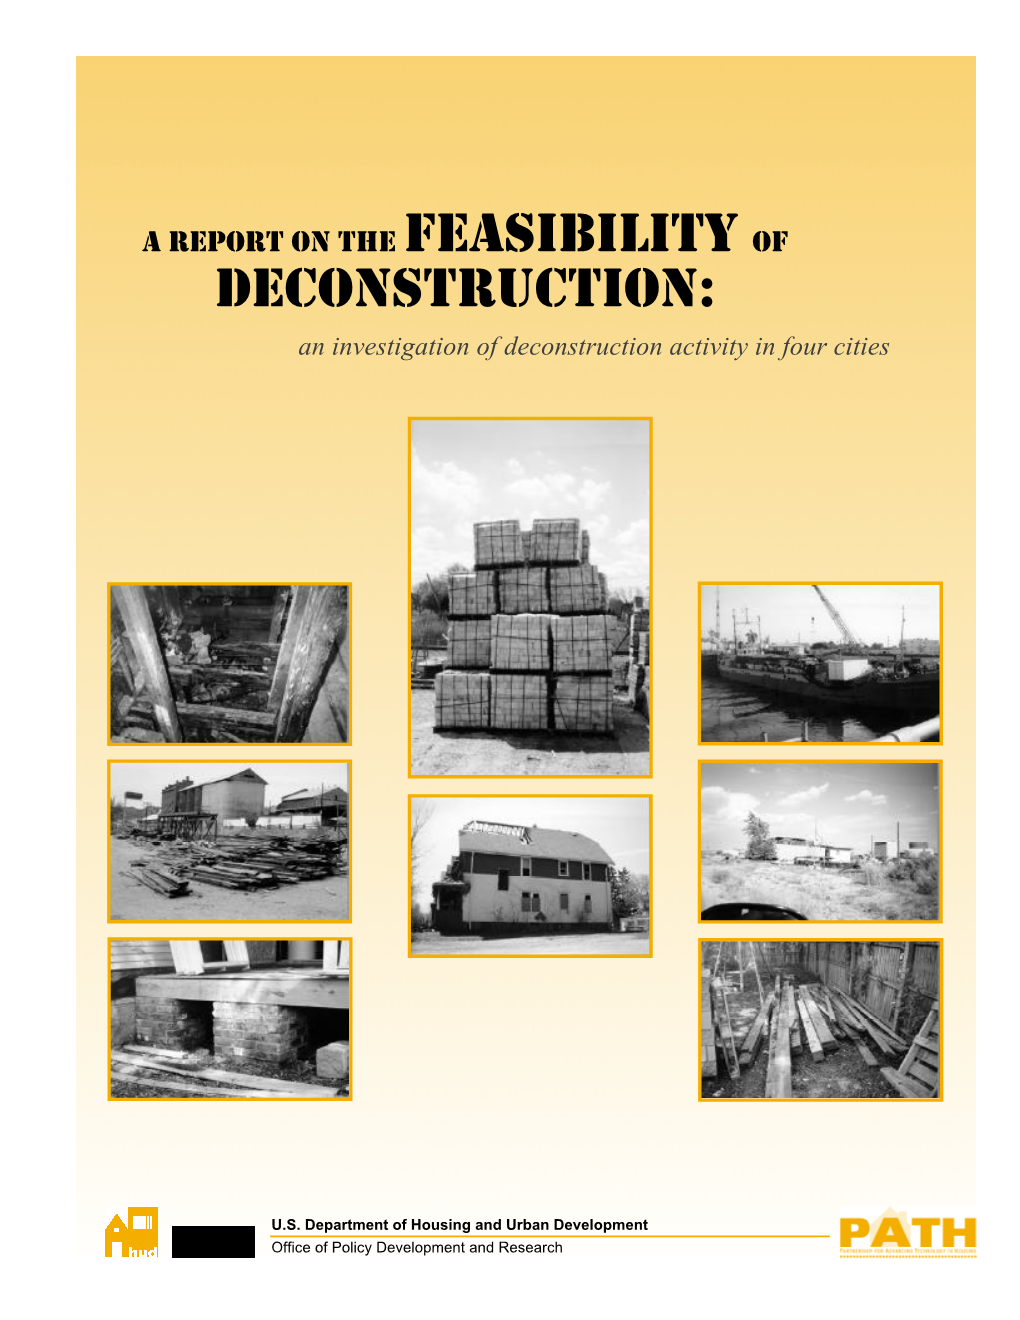 A Report on the Feasibility of Deconstruction: an Investigation of Deconstruction Activity in Four Cities